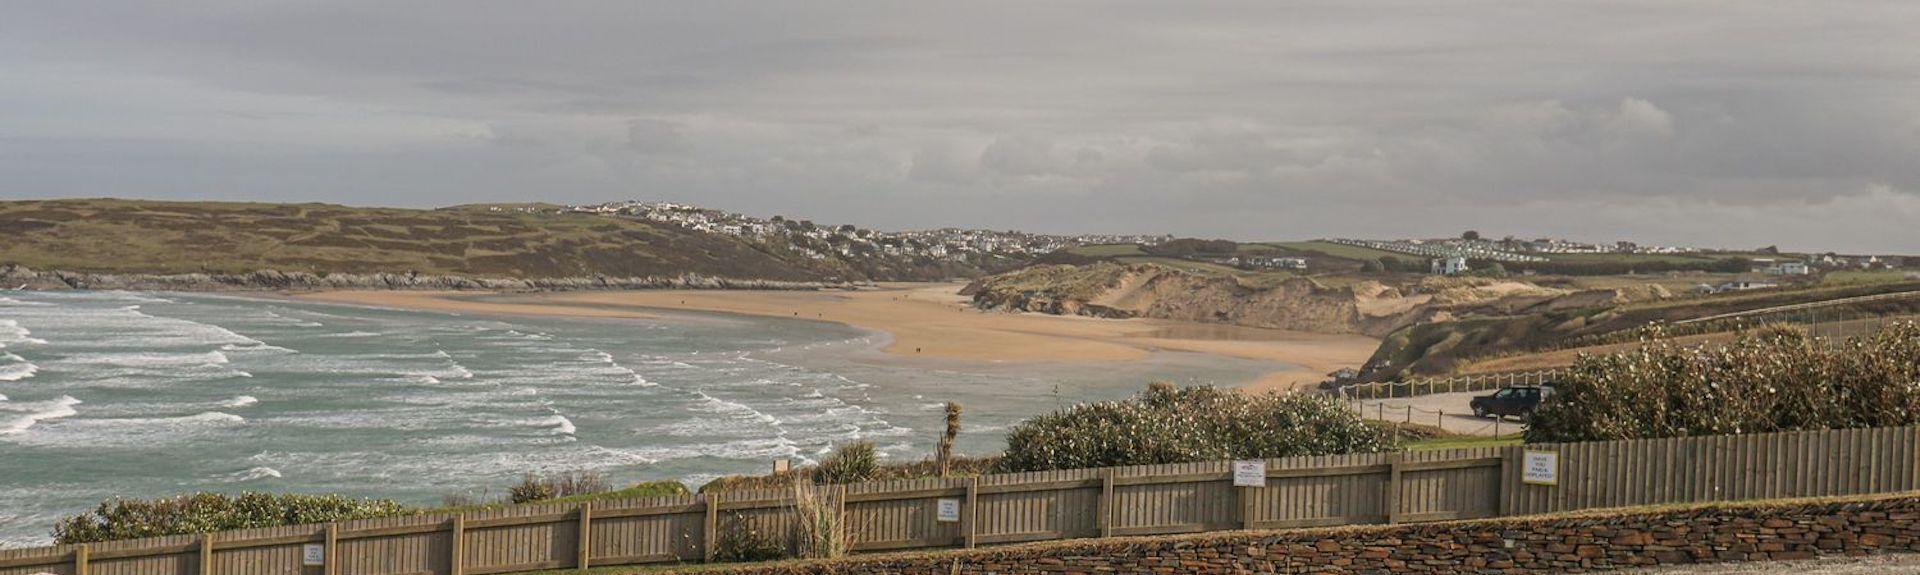 A Cornish landscape view looking across open fields, sand dunes to the sandy surfing beach at Crantock